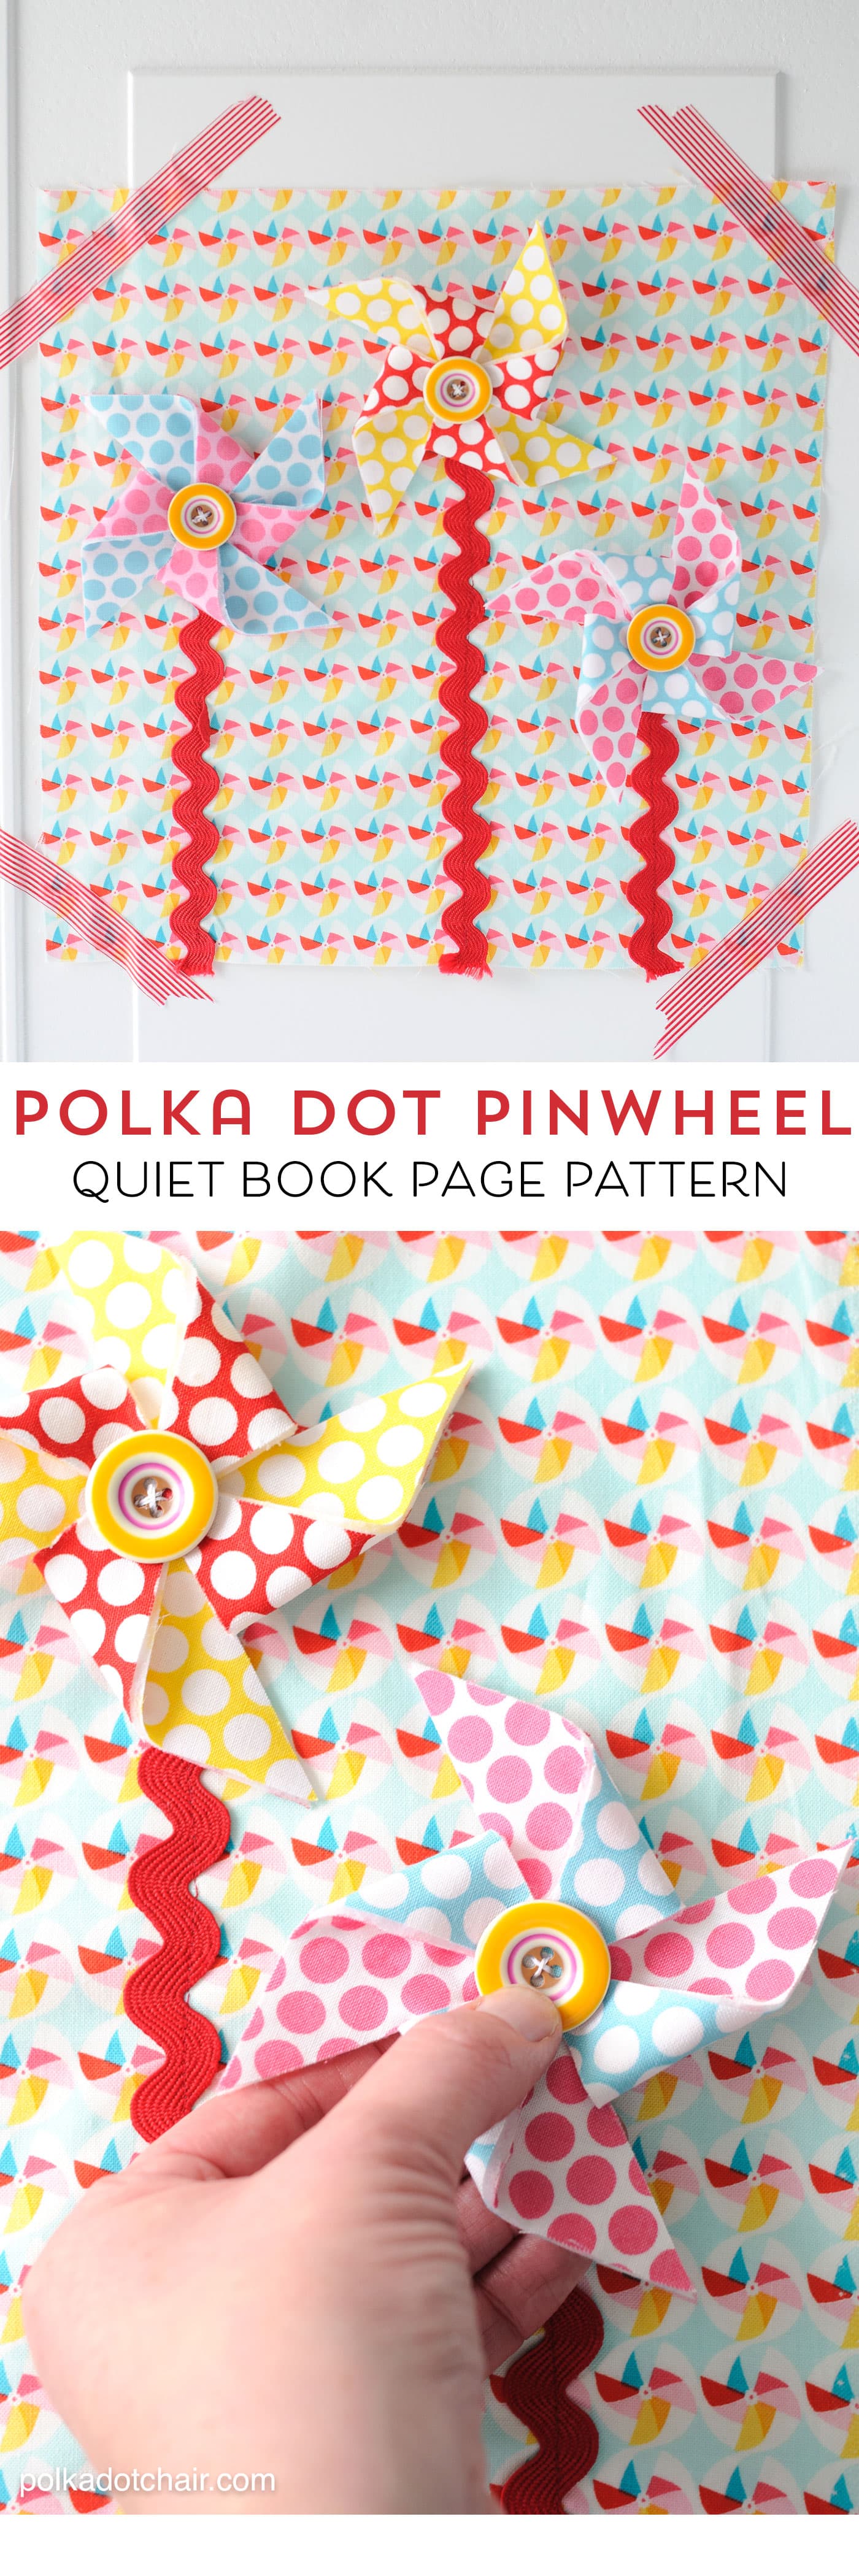 Sewing Pattern for a quiet book page with snap on pinwheels.